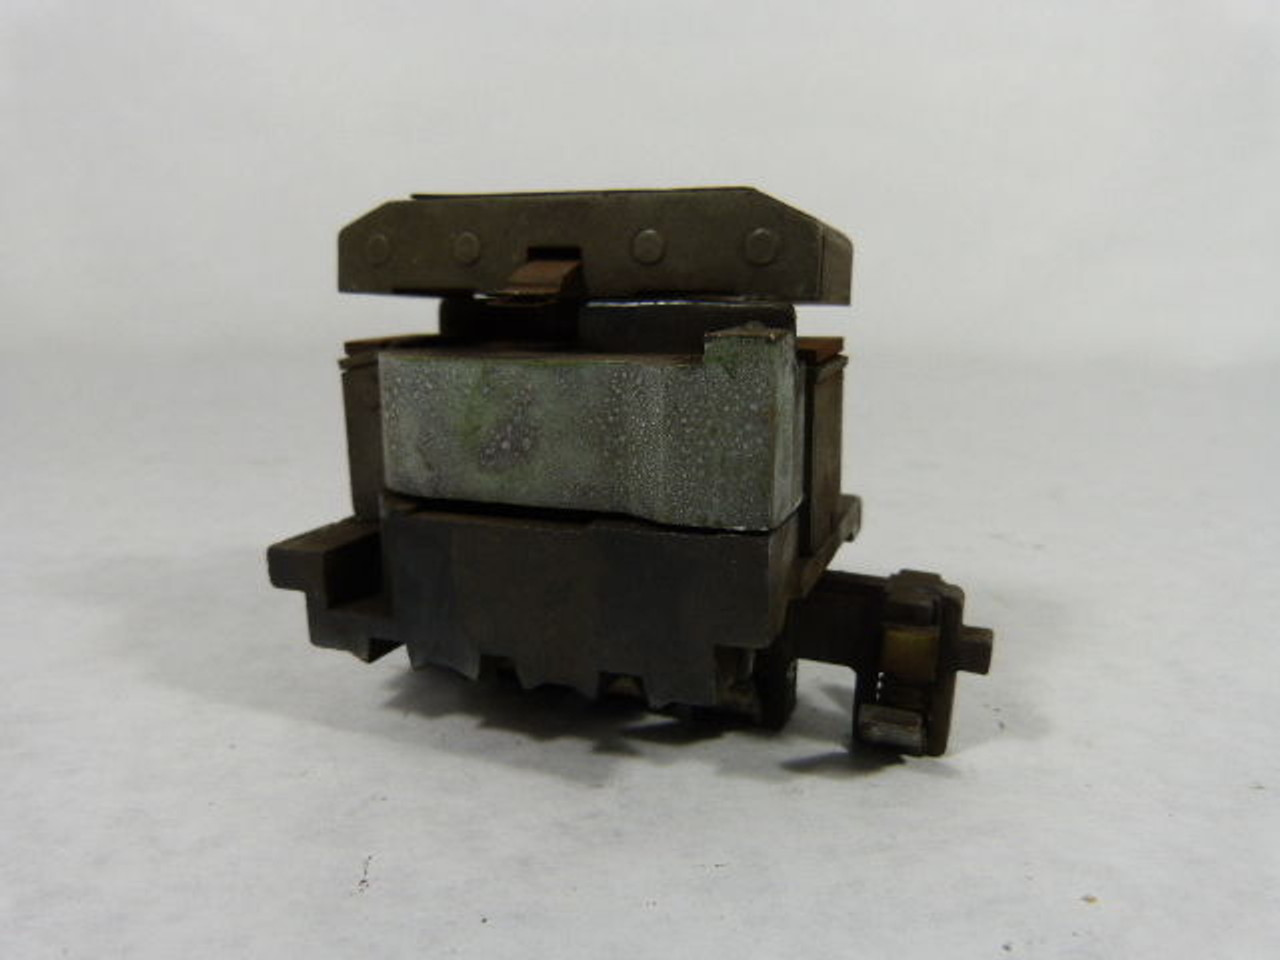 General Electric CR105C0 Contactor 110/220V 30A USED